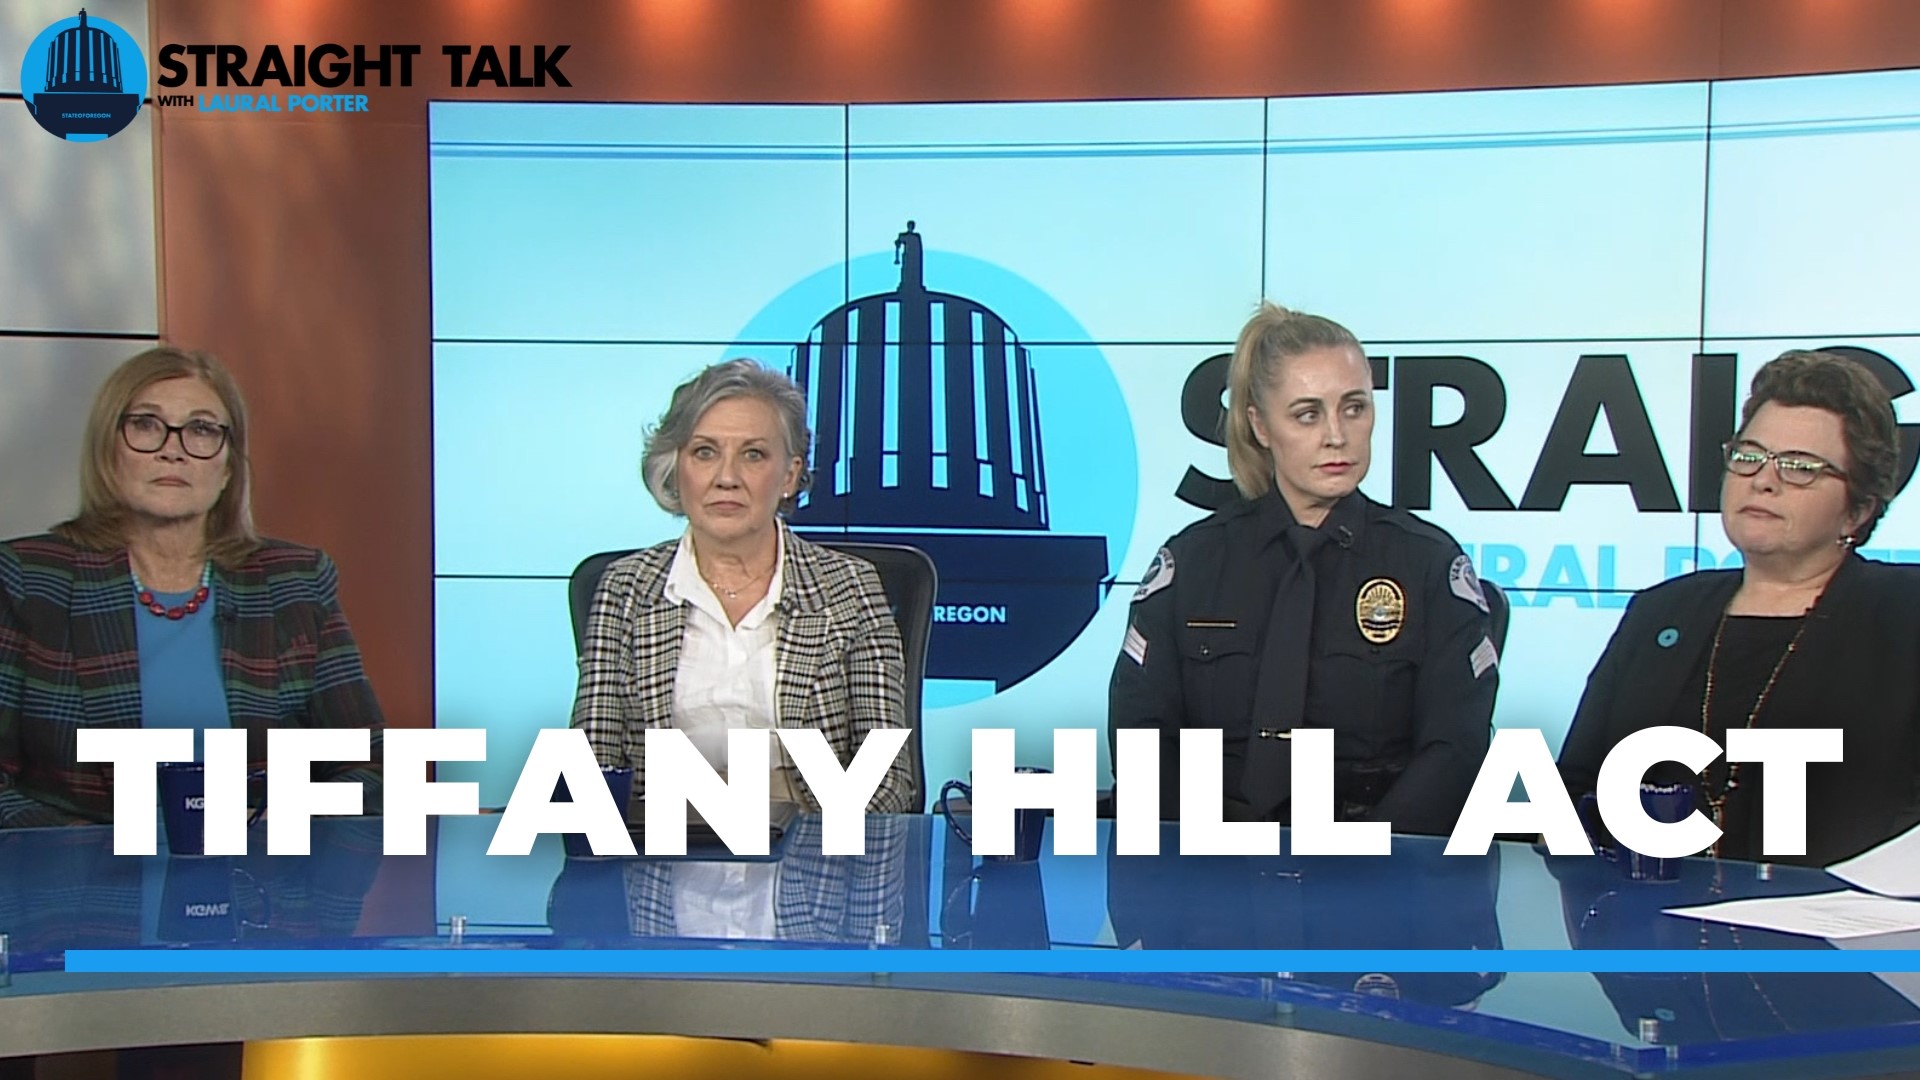 This week's episode of Straight Talk discusses the murder of a Vancouver mother and daughter, the Tiffany Hill Act and other domestic violence prevention strategies.